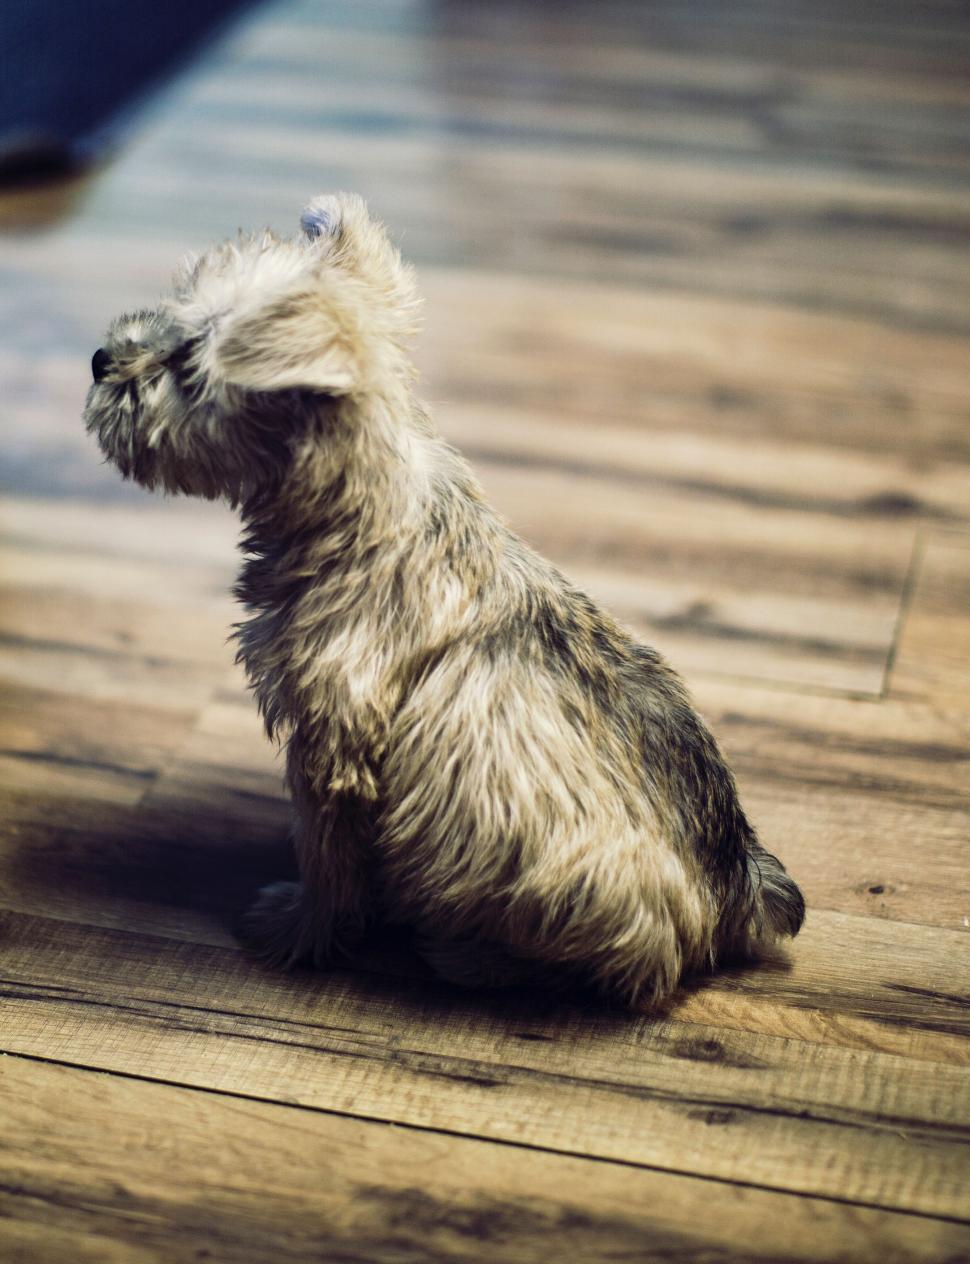 Free Image of Small Dog Sitting on Top of Wooden Floor 